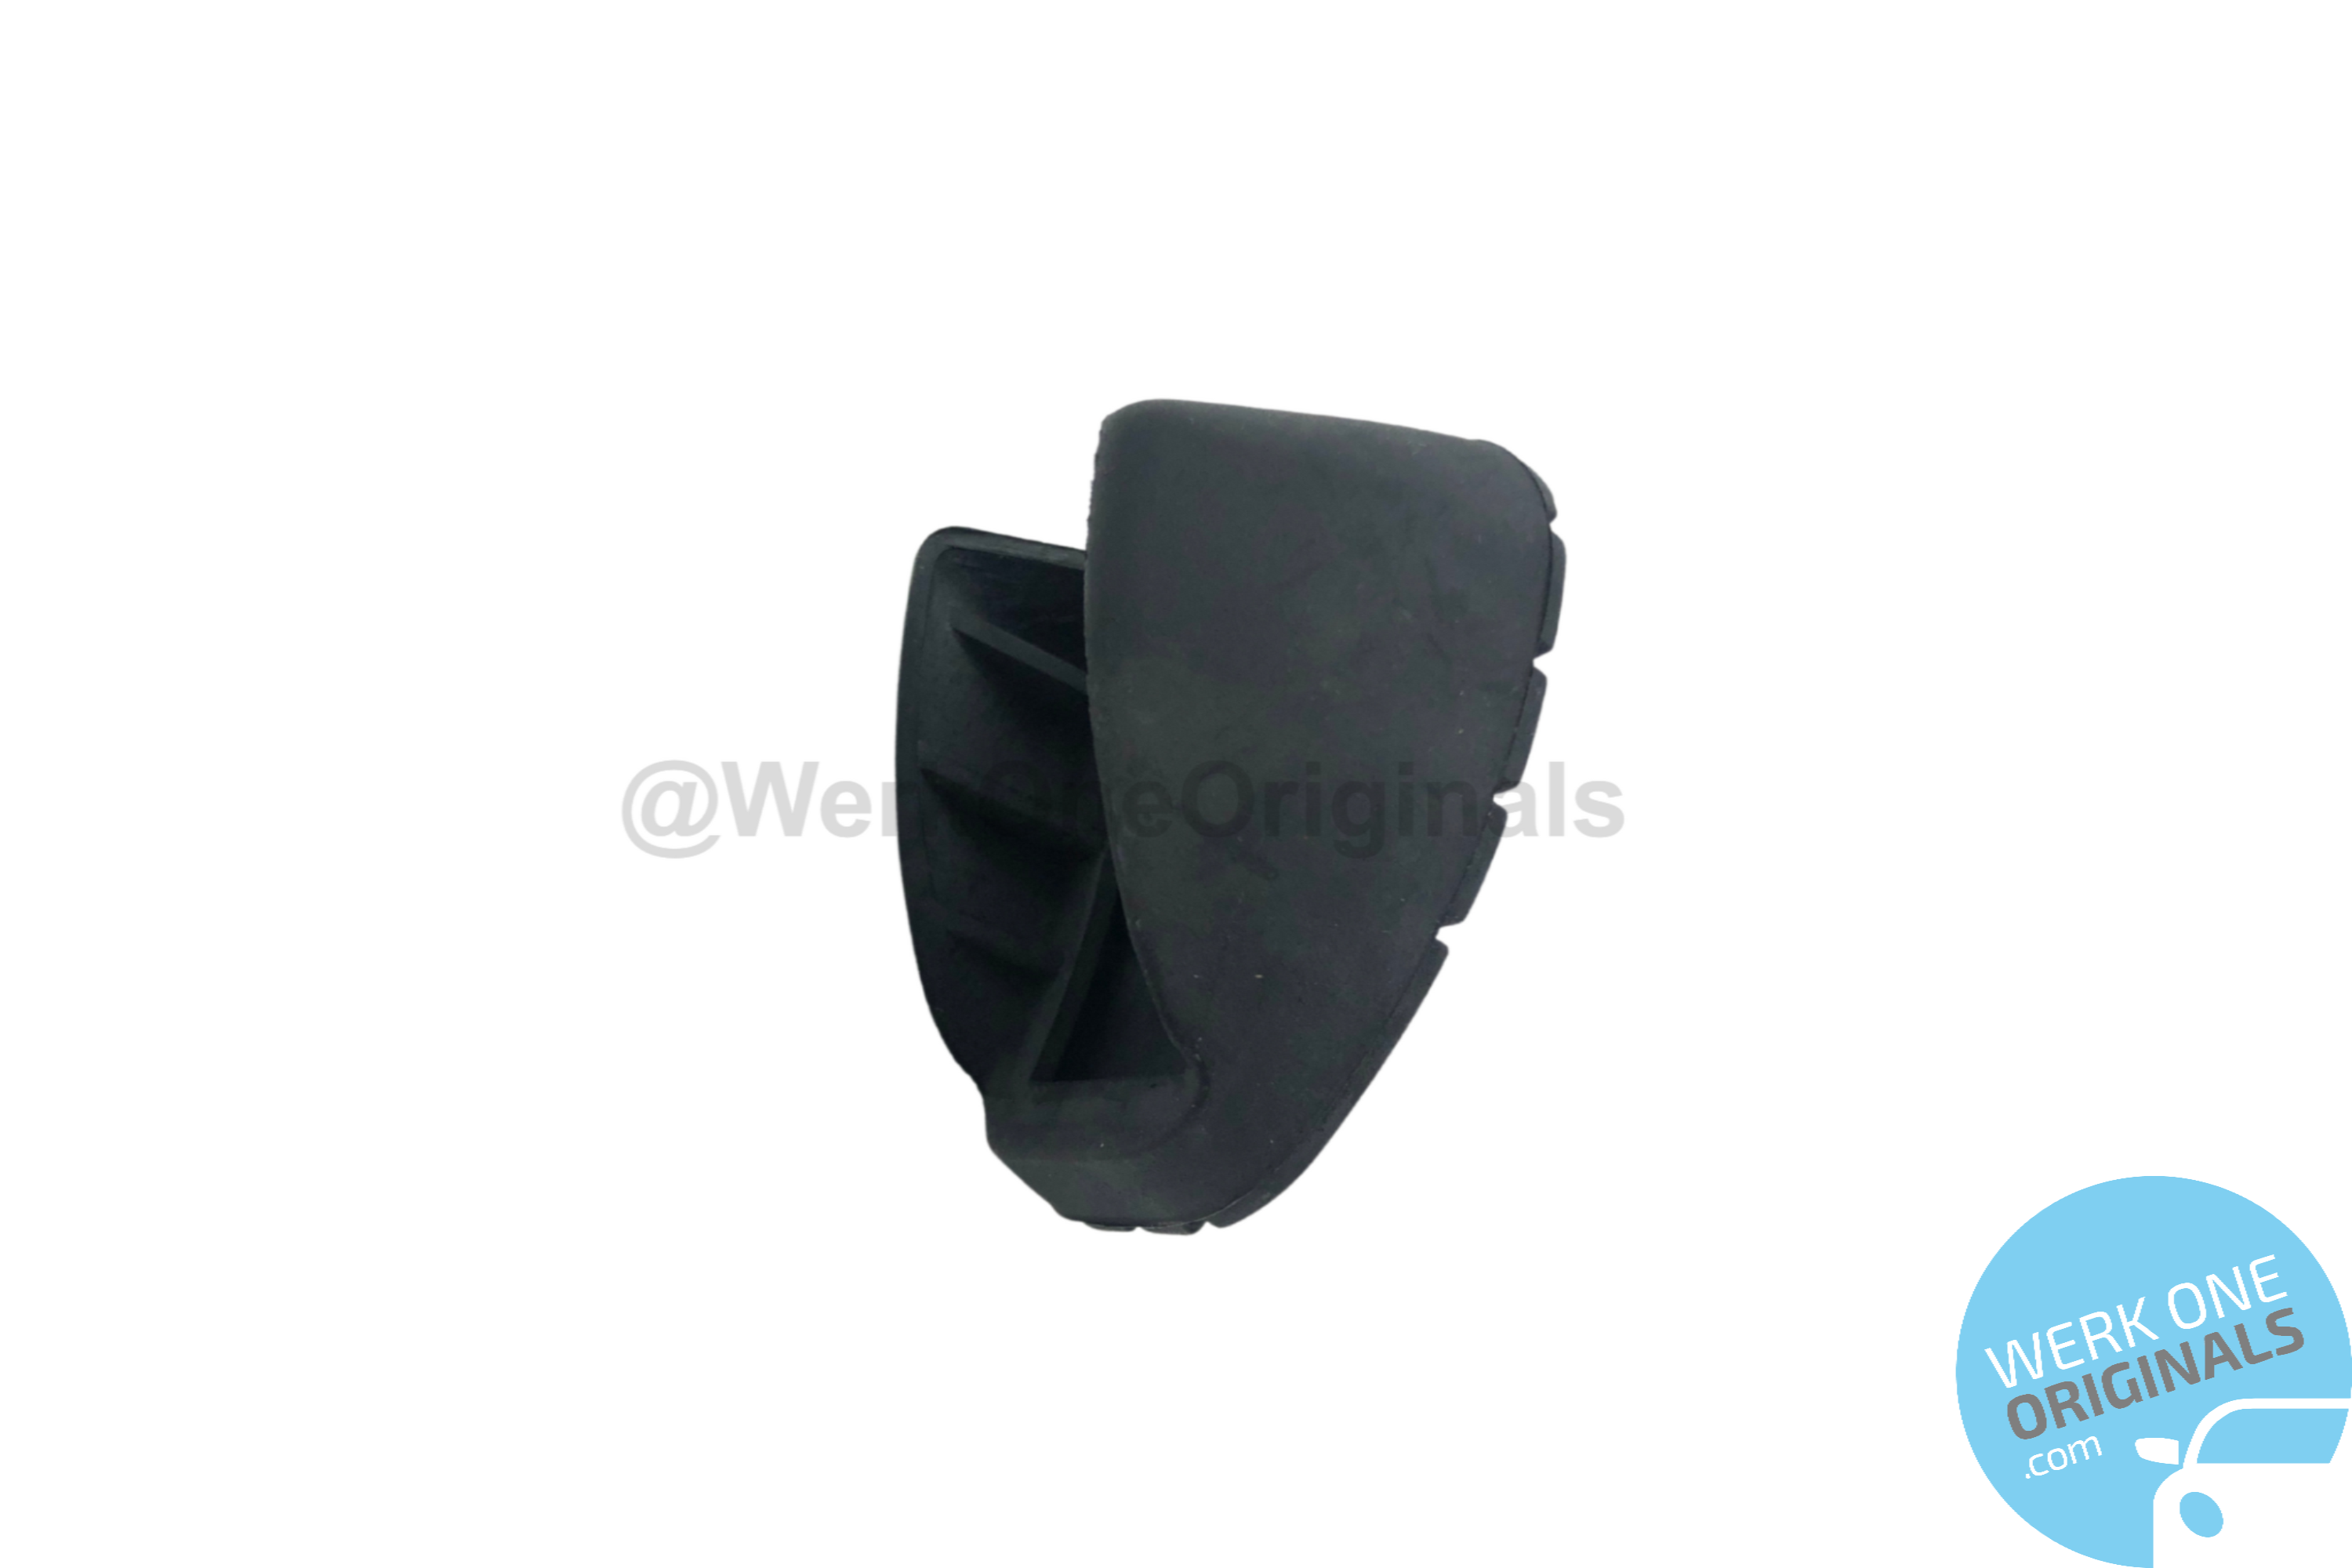 Porsche Replacement Brake & Clutch Pedal Caps for 911 Type 996 Models